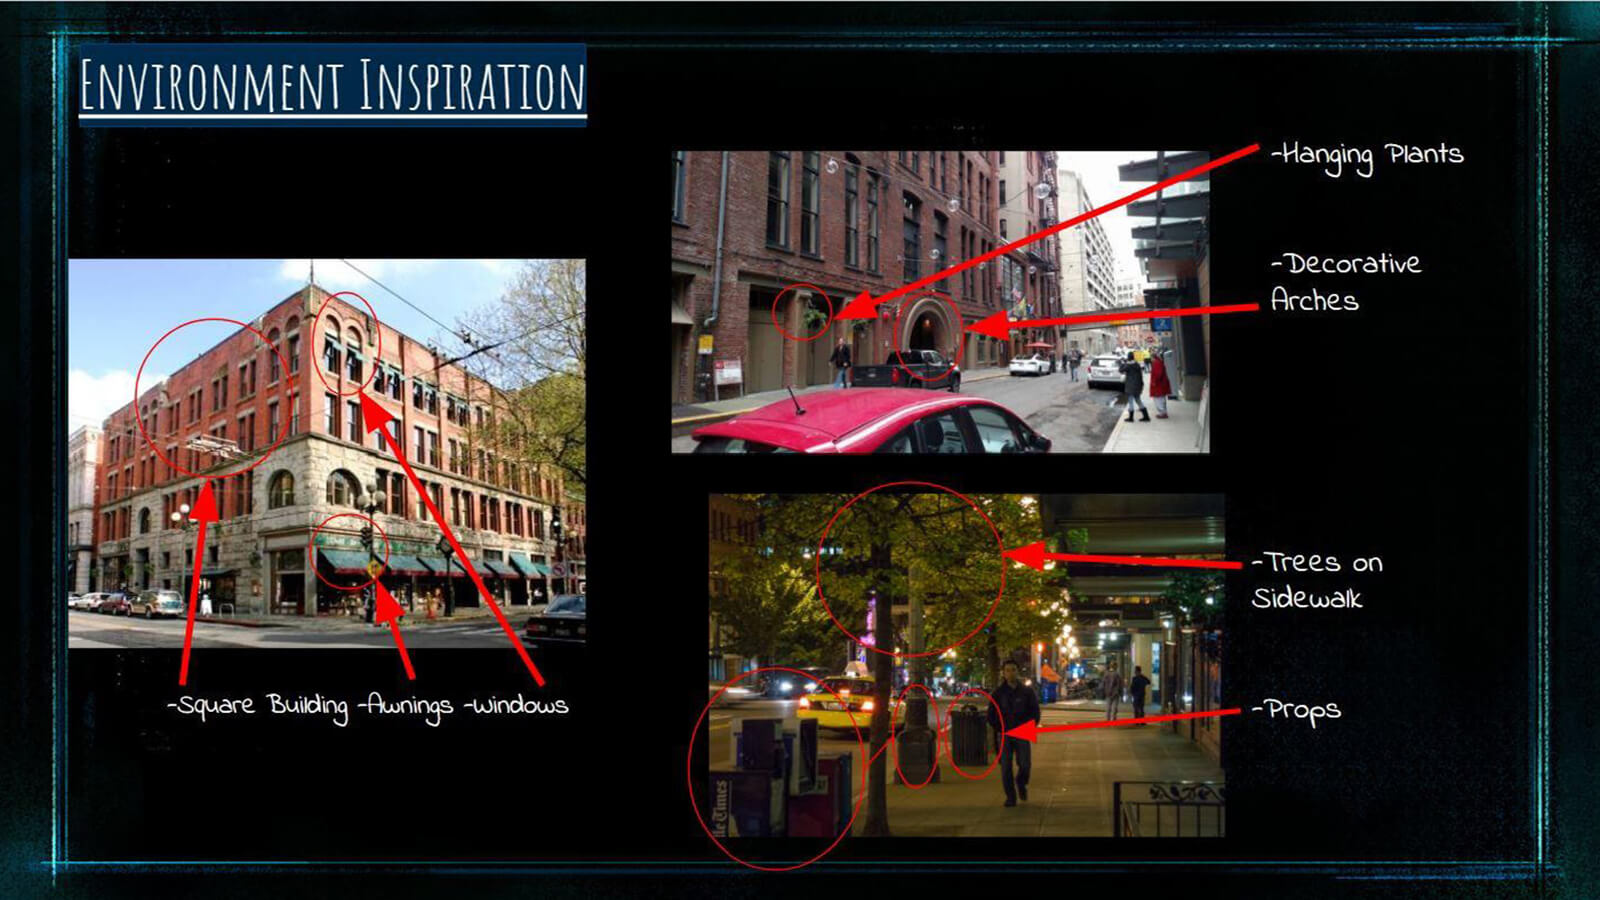 An "Environment Inspiration" slide, showing real world photos of urban locales that inspired the film's environments.